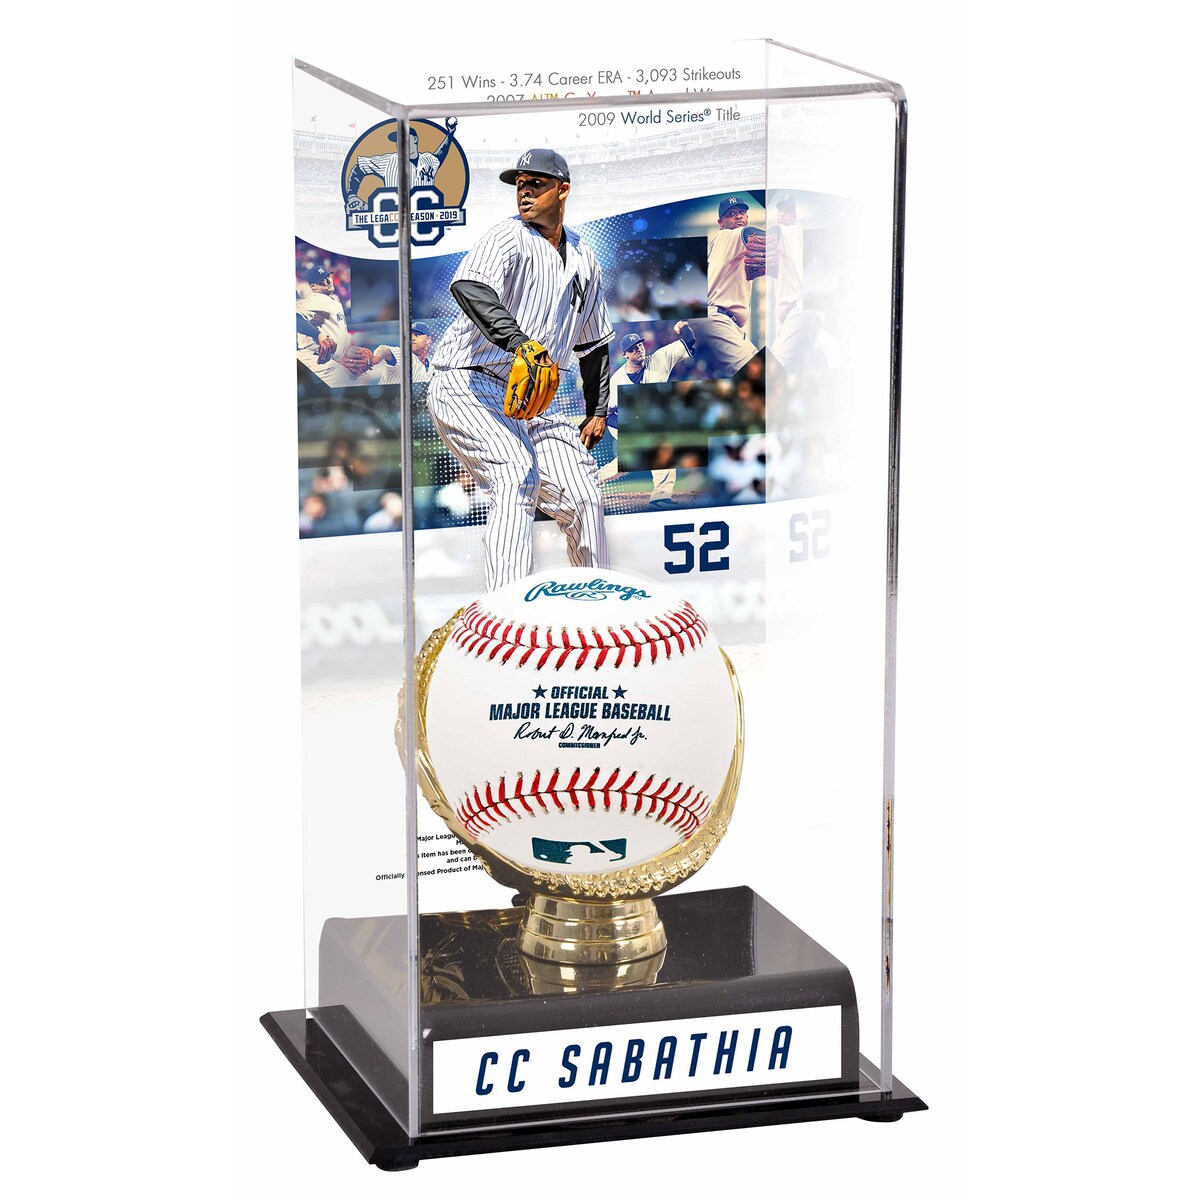 Commemorate CC Sabathia's retirement with this acrylic display case. It comes with an image, a sublimated plate and a black acrylic base with a gold colored glove. It also features a clear acrylic removable lid. The case measures 10'' x 5'' x 5.5'' and is officially licensed by Major League Baseball. Memorabilia not included.Brand: Fanatics AuthenticMemorabilia sold separatelyOfficially licensed